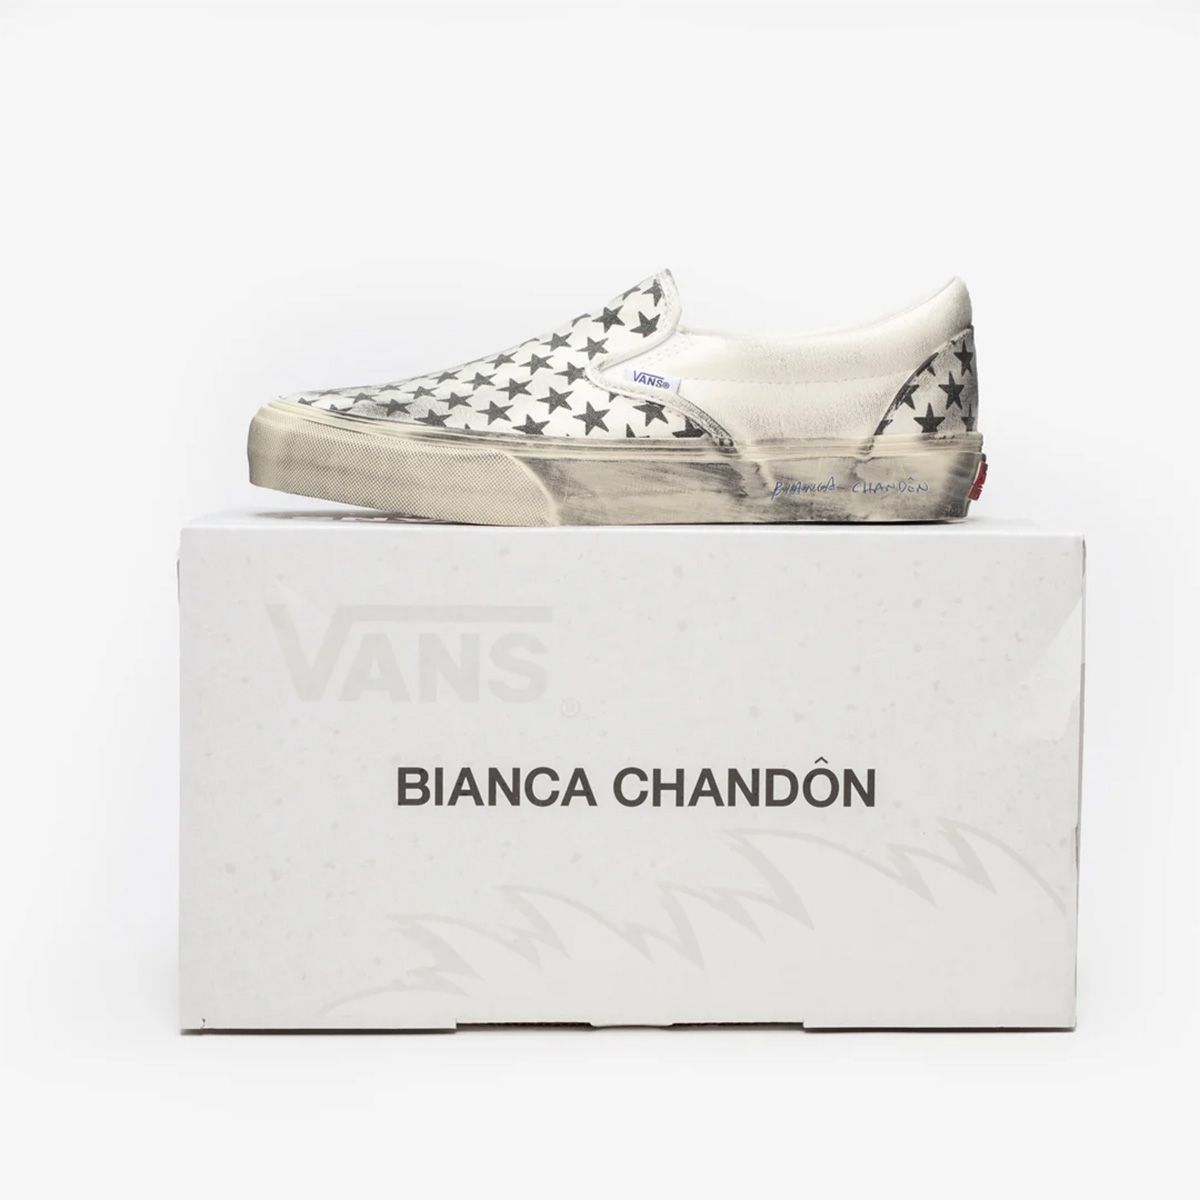 Bianca Chandôn x Vans Collection Goes All-In on the Aged-Look